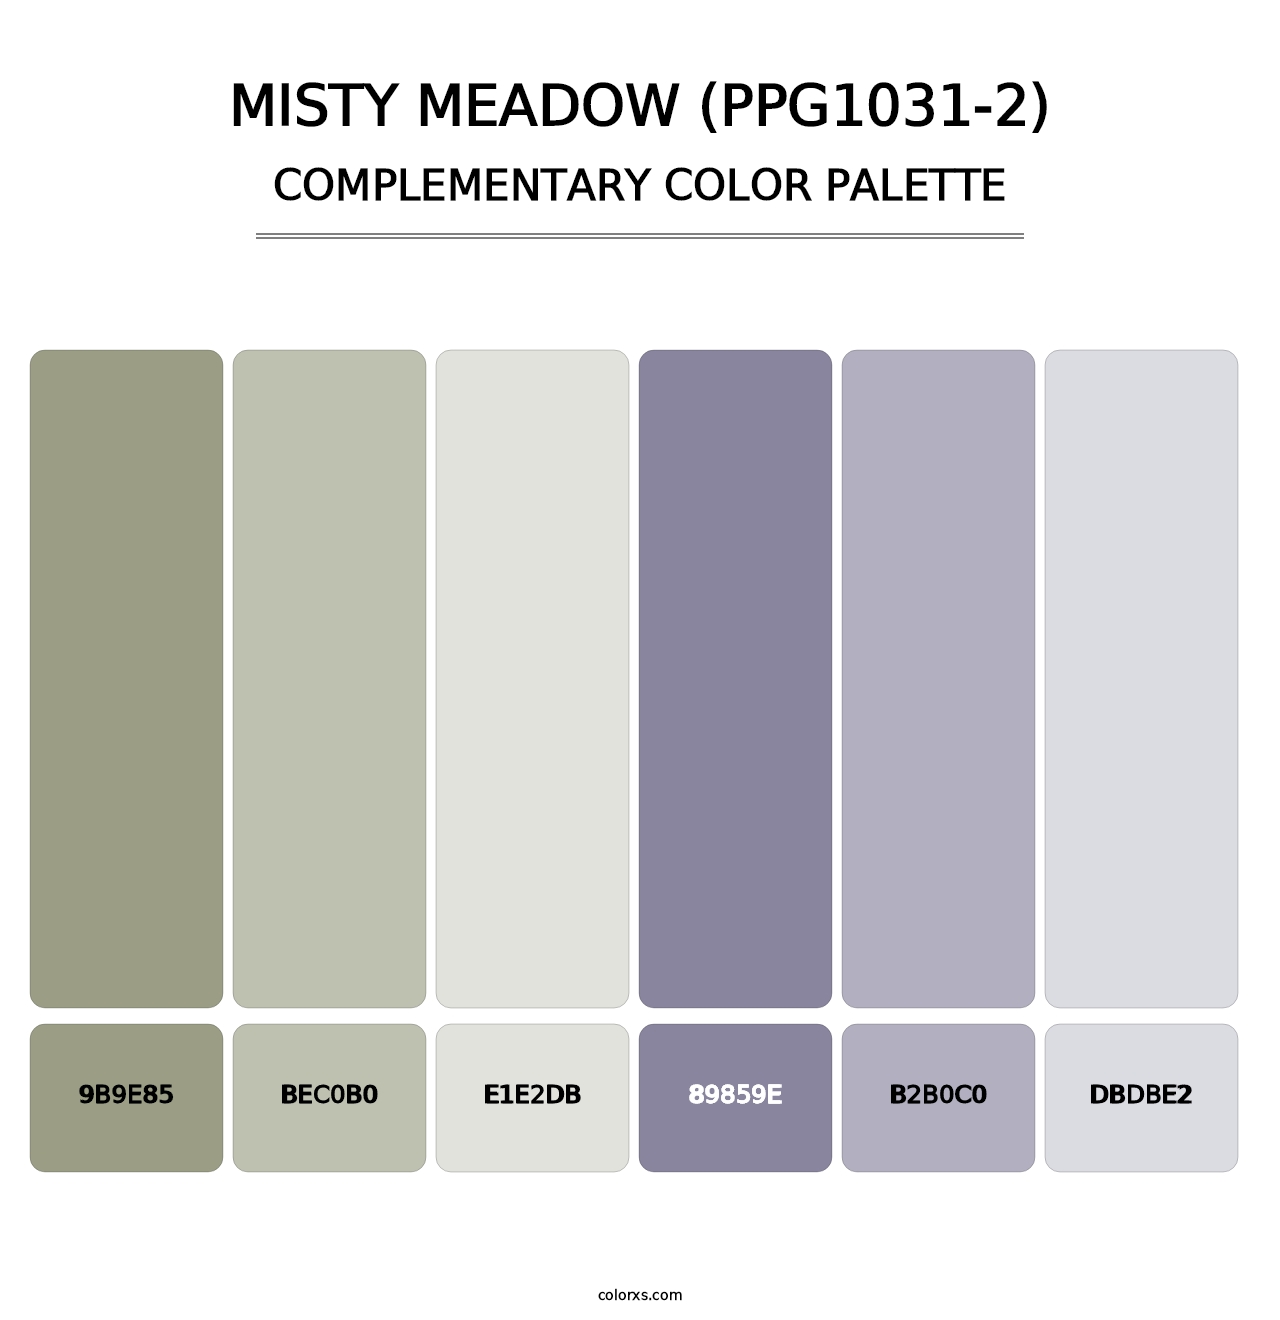 Misty Meadow (PPG1031-2) - Complementary Color Palette